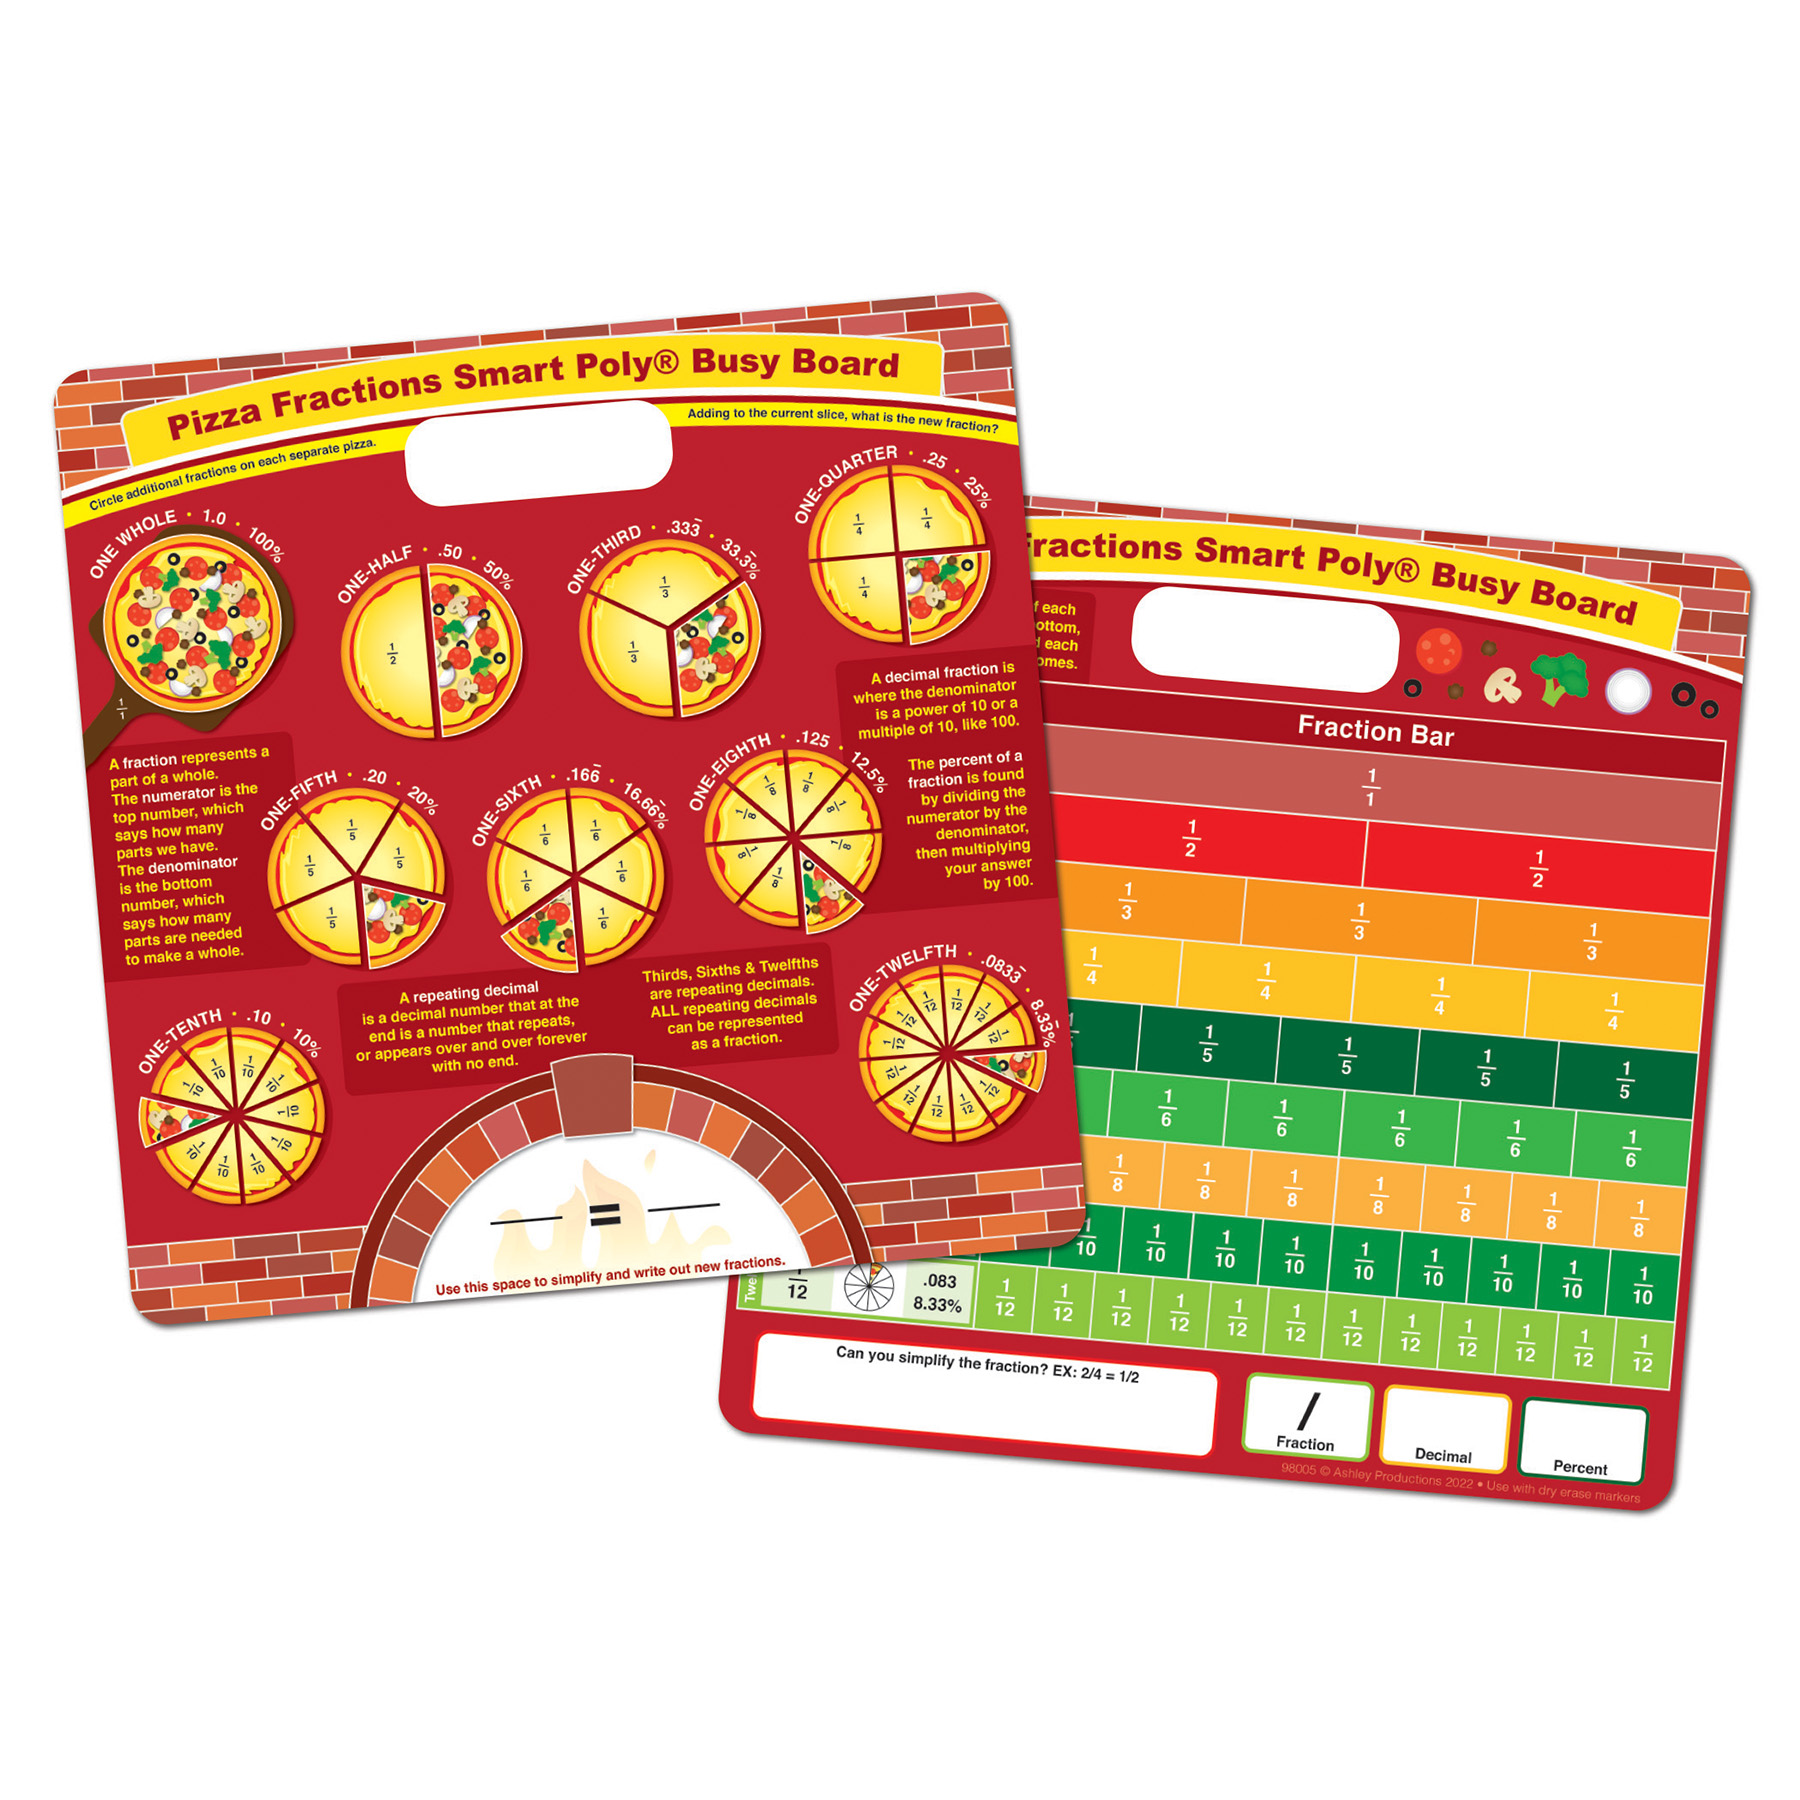 Smart Poly Educational Activity Busy Board, Dry Erase with Marker, 10-3/4" x 10-3/4", Pizza Fractions